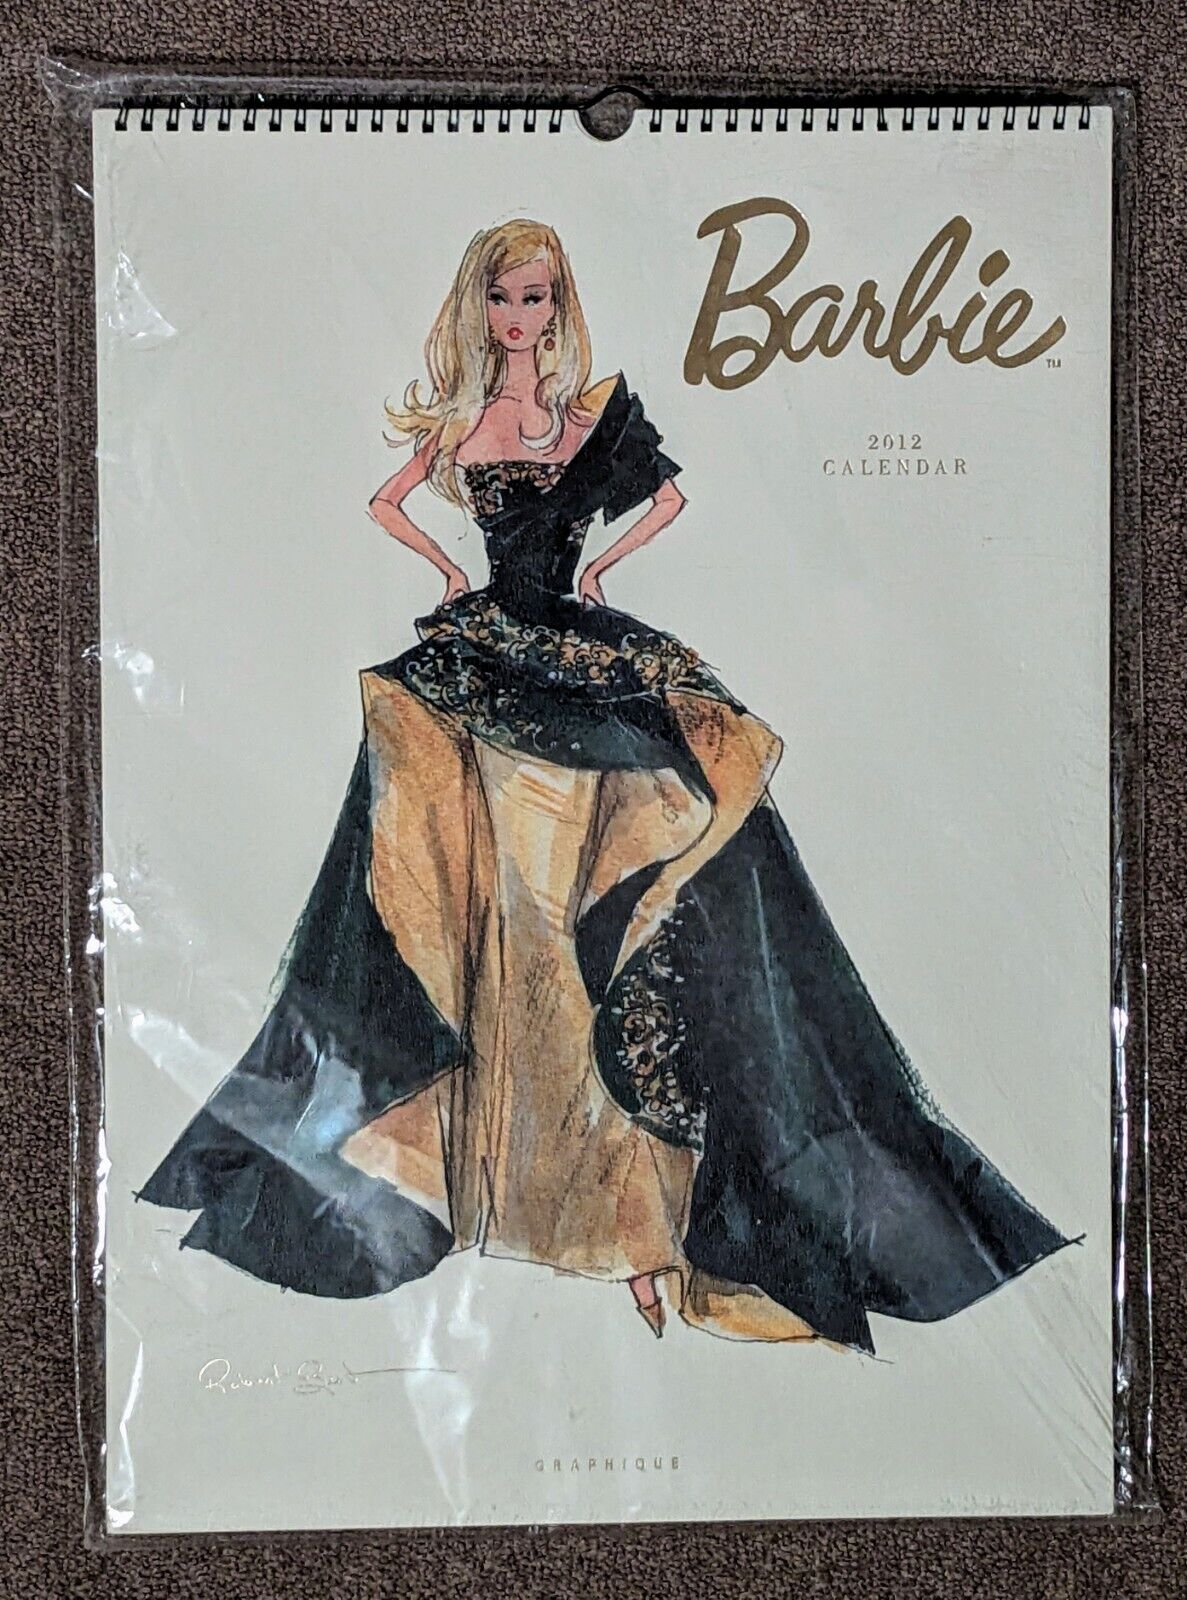 New 2012 Barbie Graphique Calendar Robert Best * Hard to Find Collectable